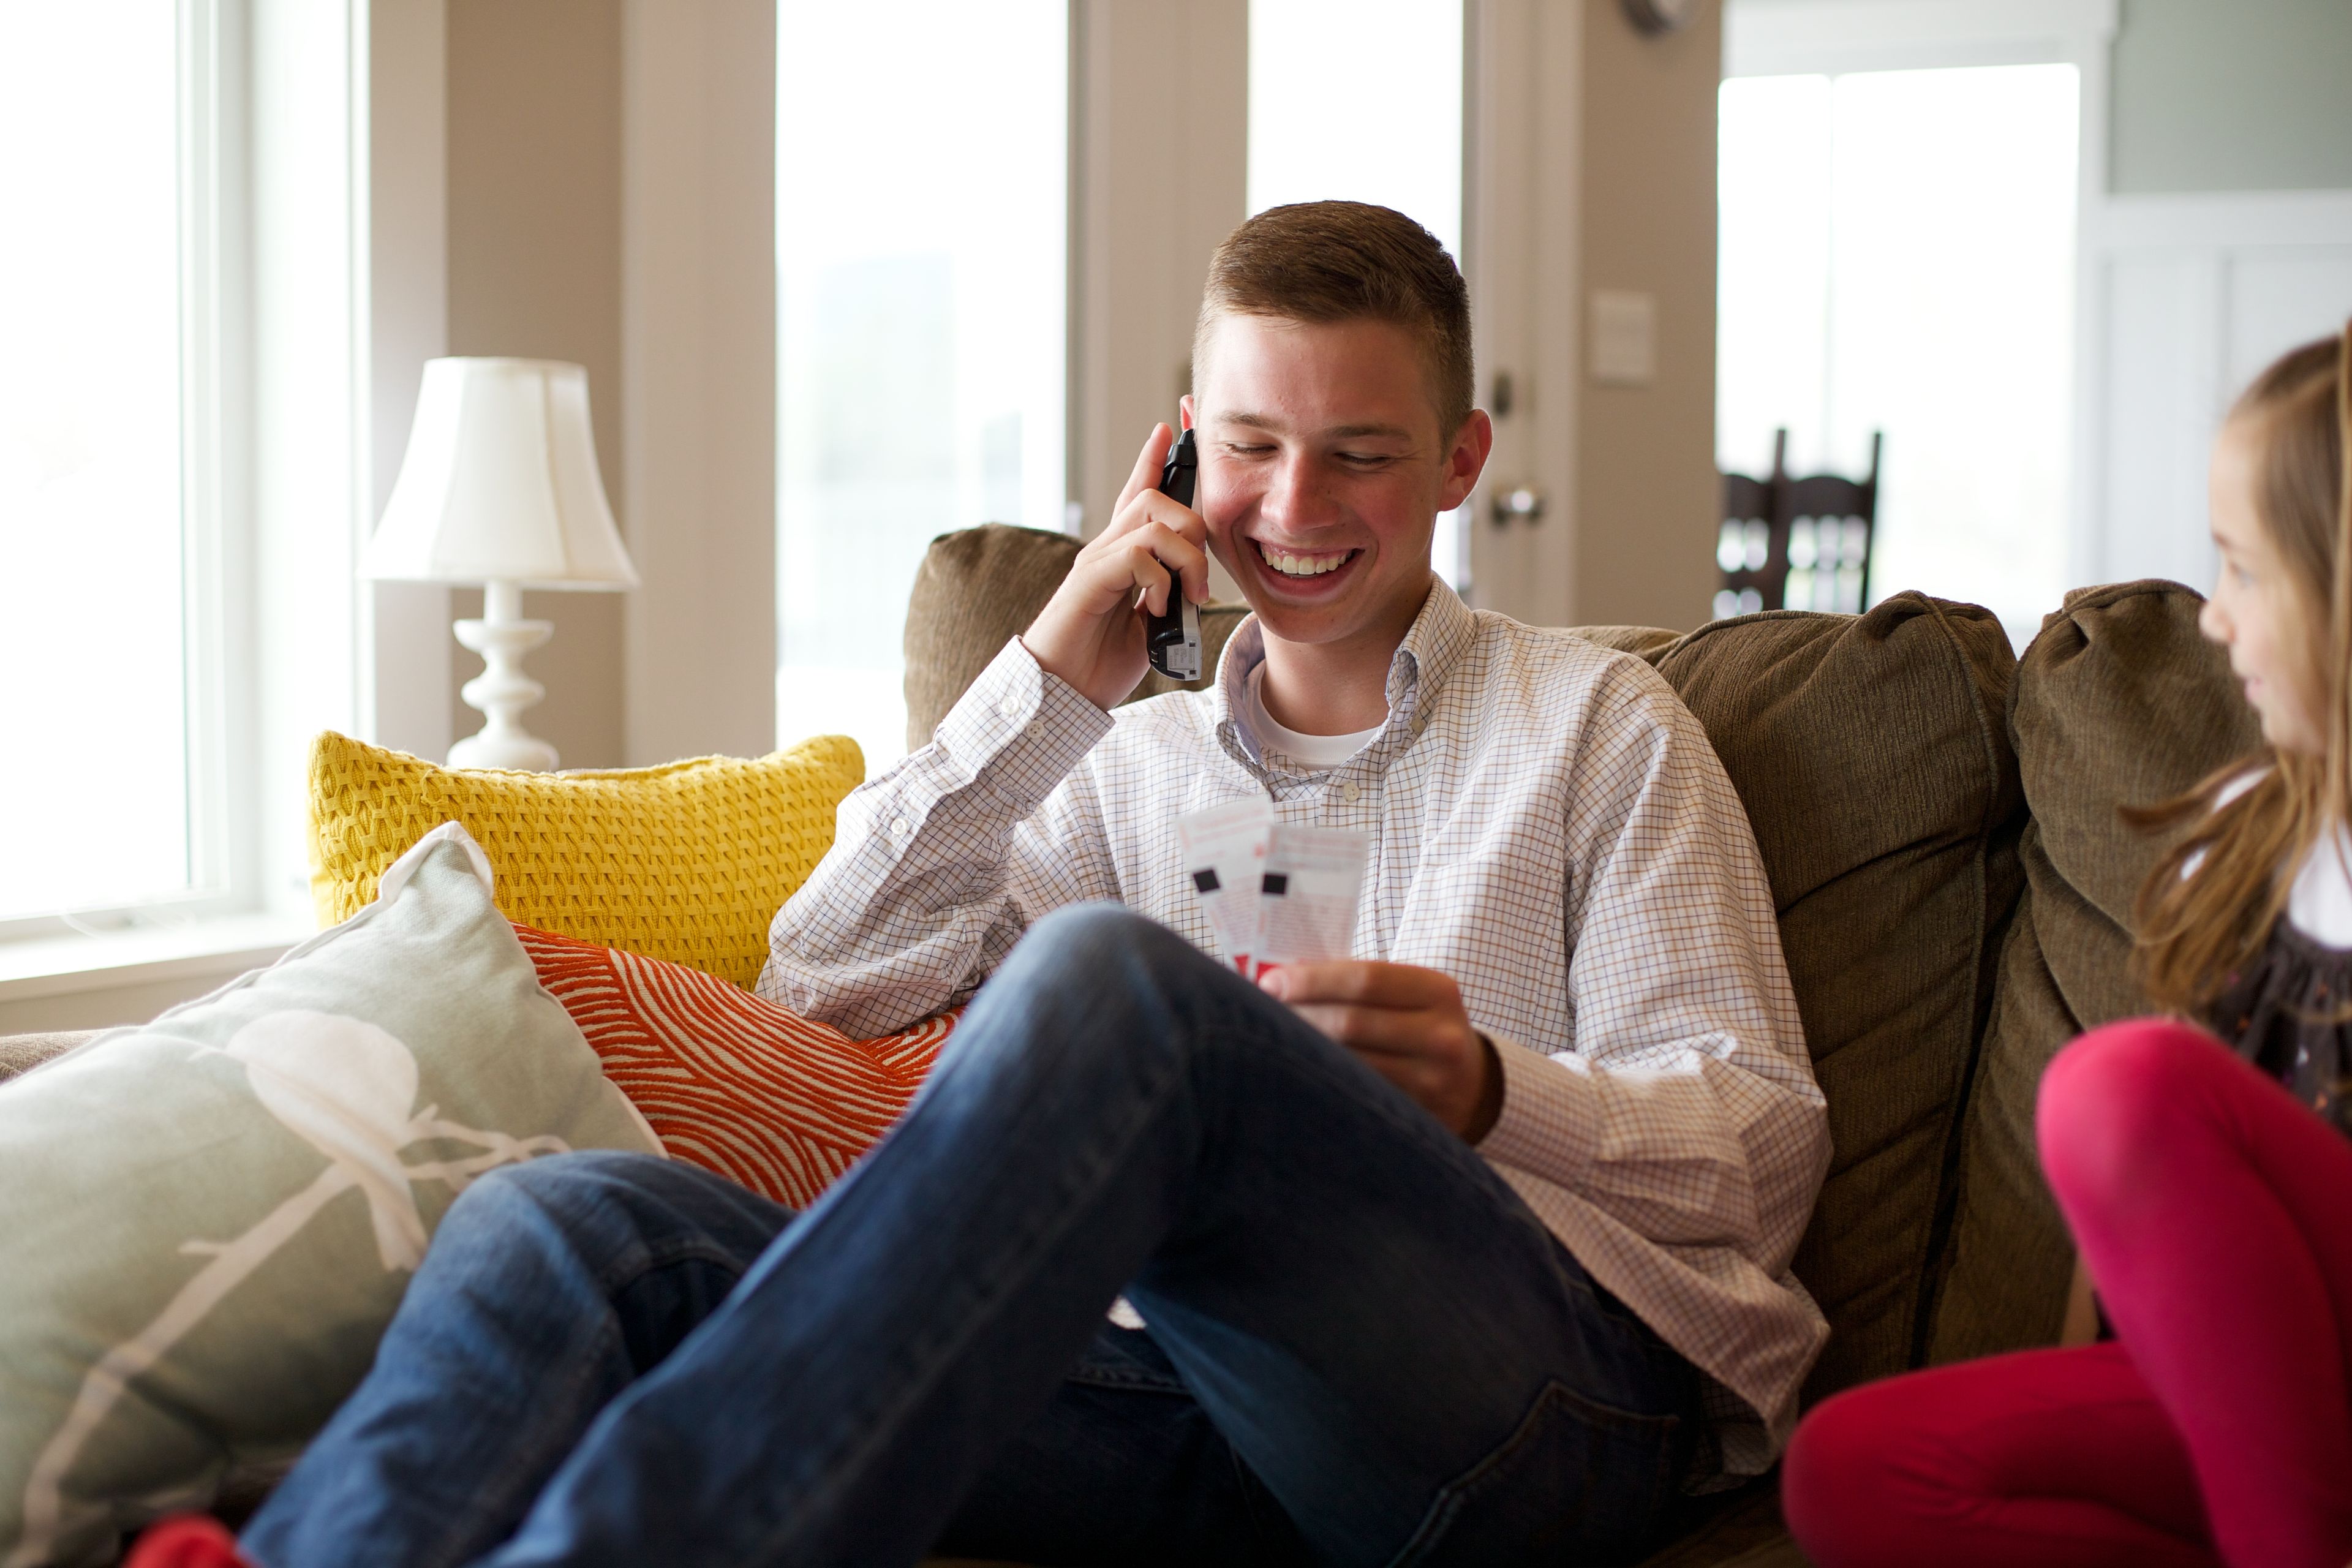 A young man sits on a couch and talks on a phone.